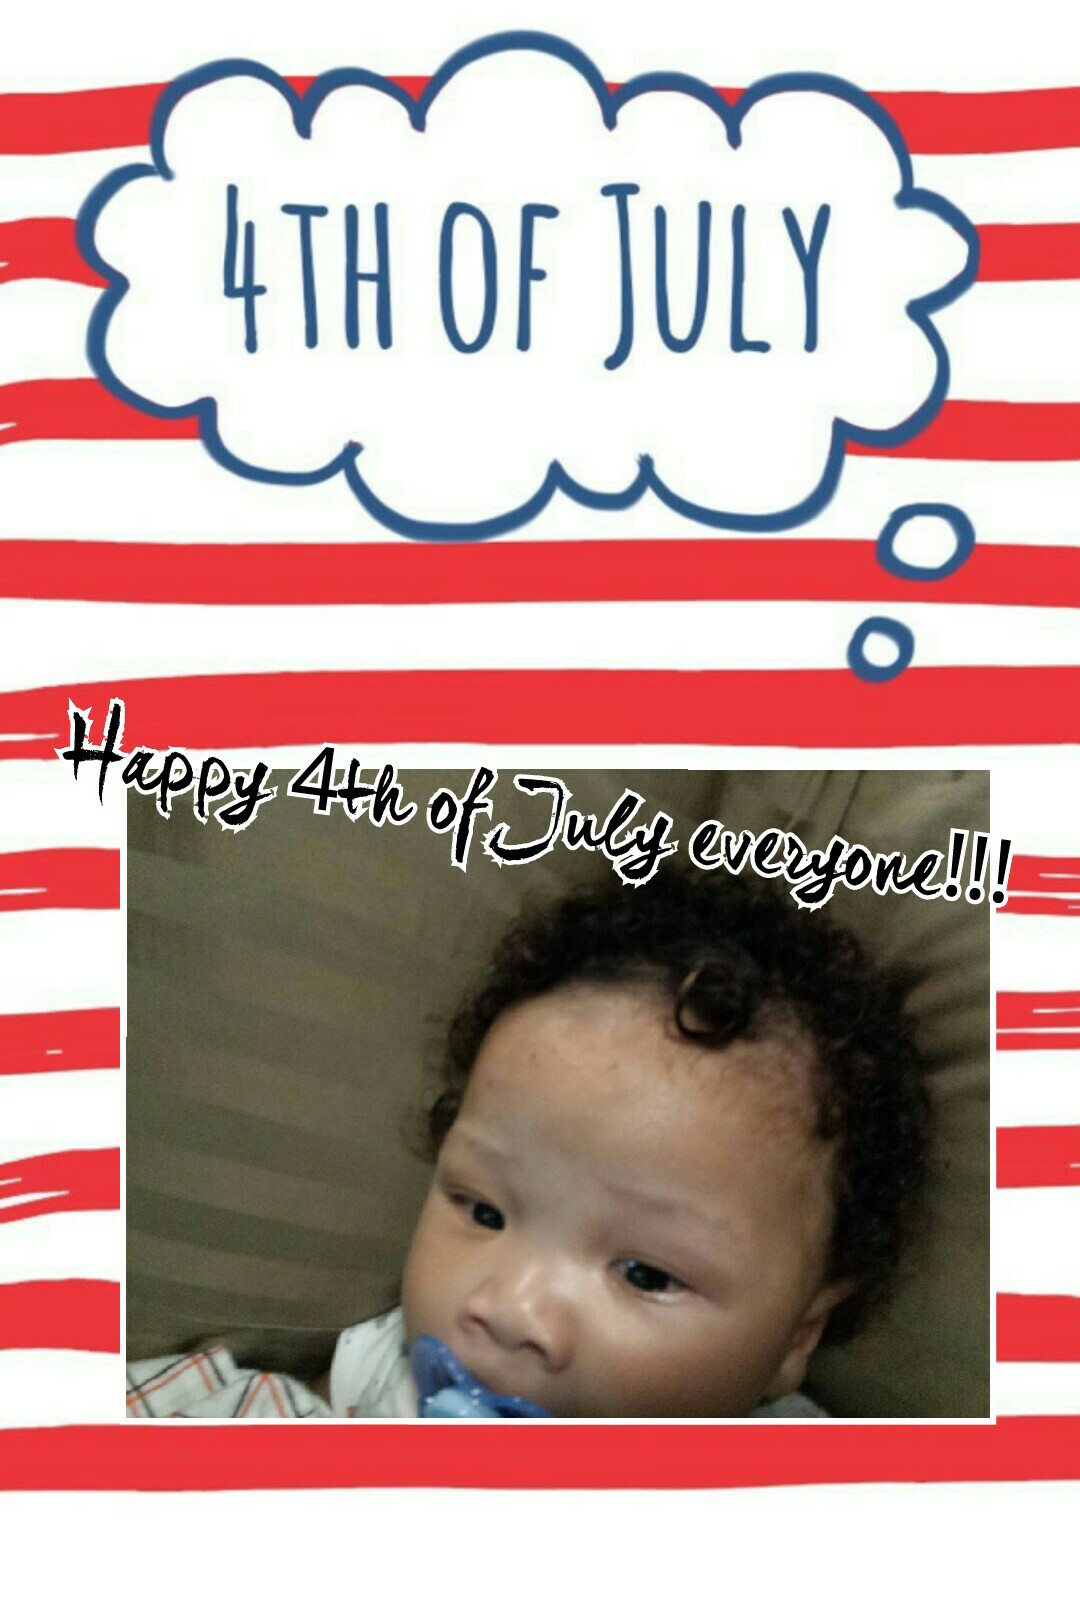 Happy 4th of July everyone!!!